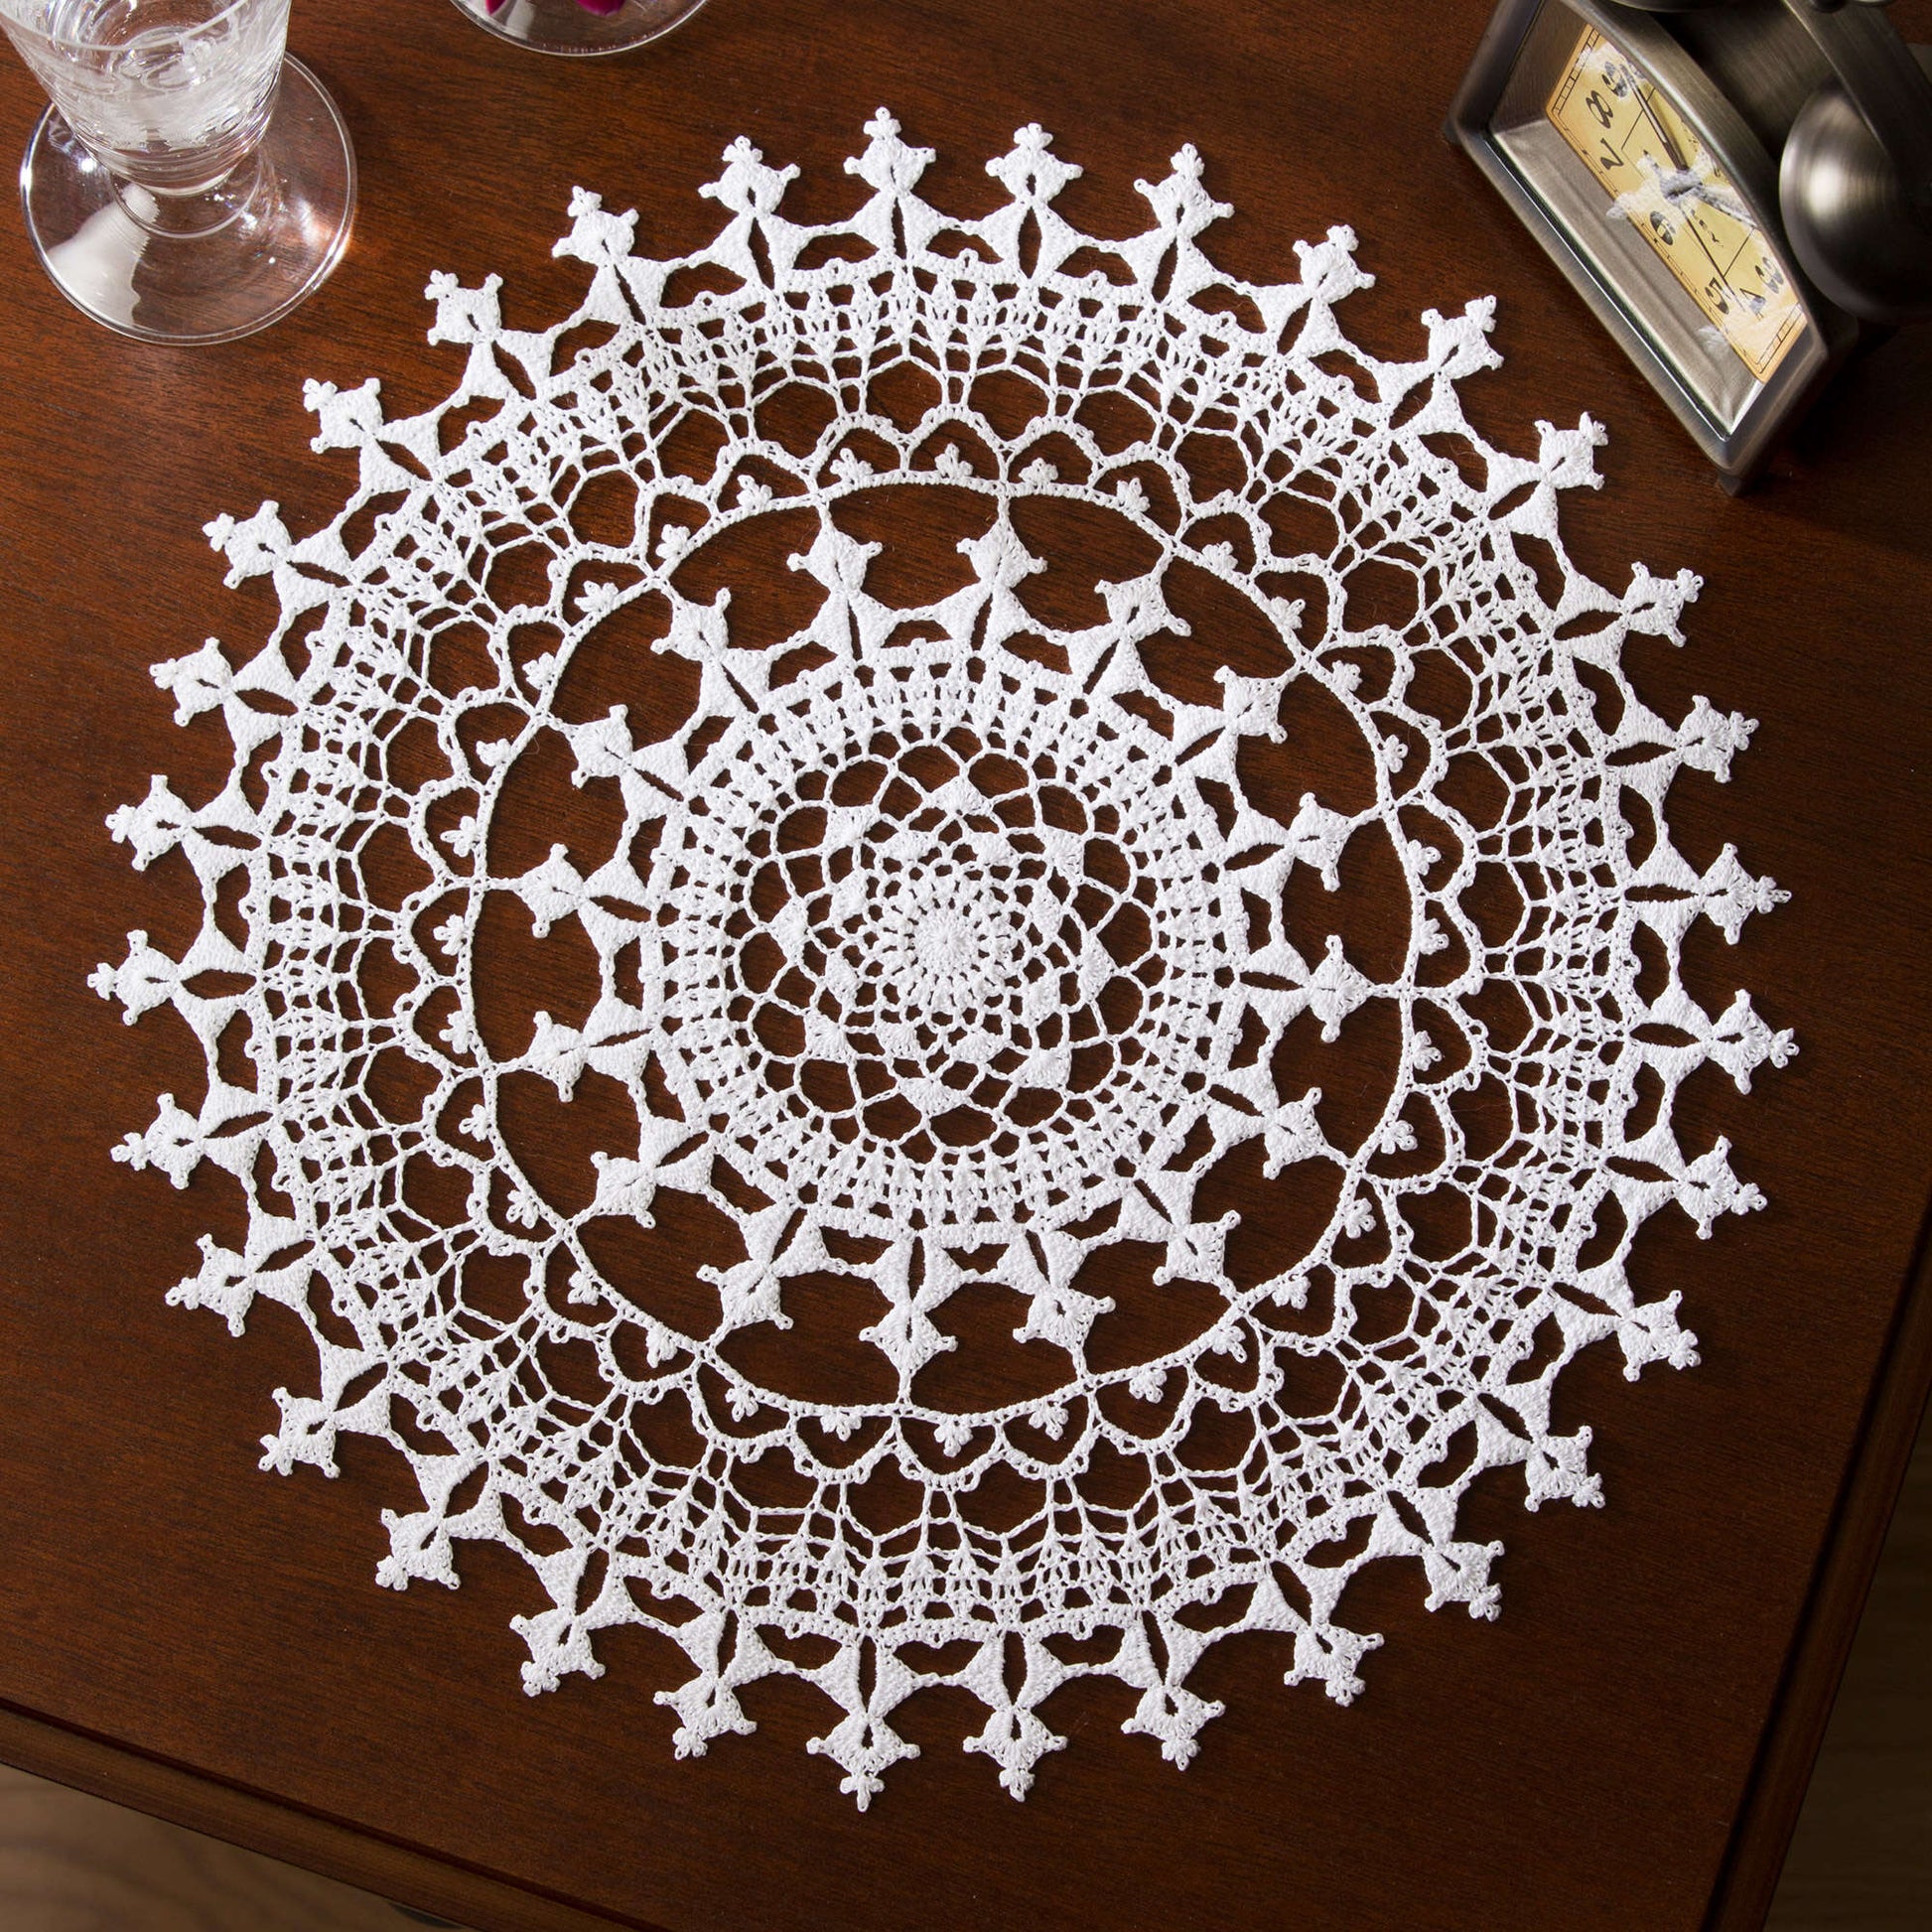 Aunt Lydia's Affinity Doily Crochet Kitchen Décor made in Aunt Lydia's Classic Crochet Thread yarn